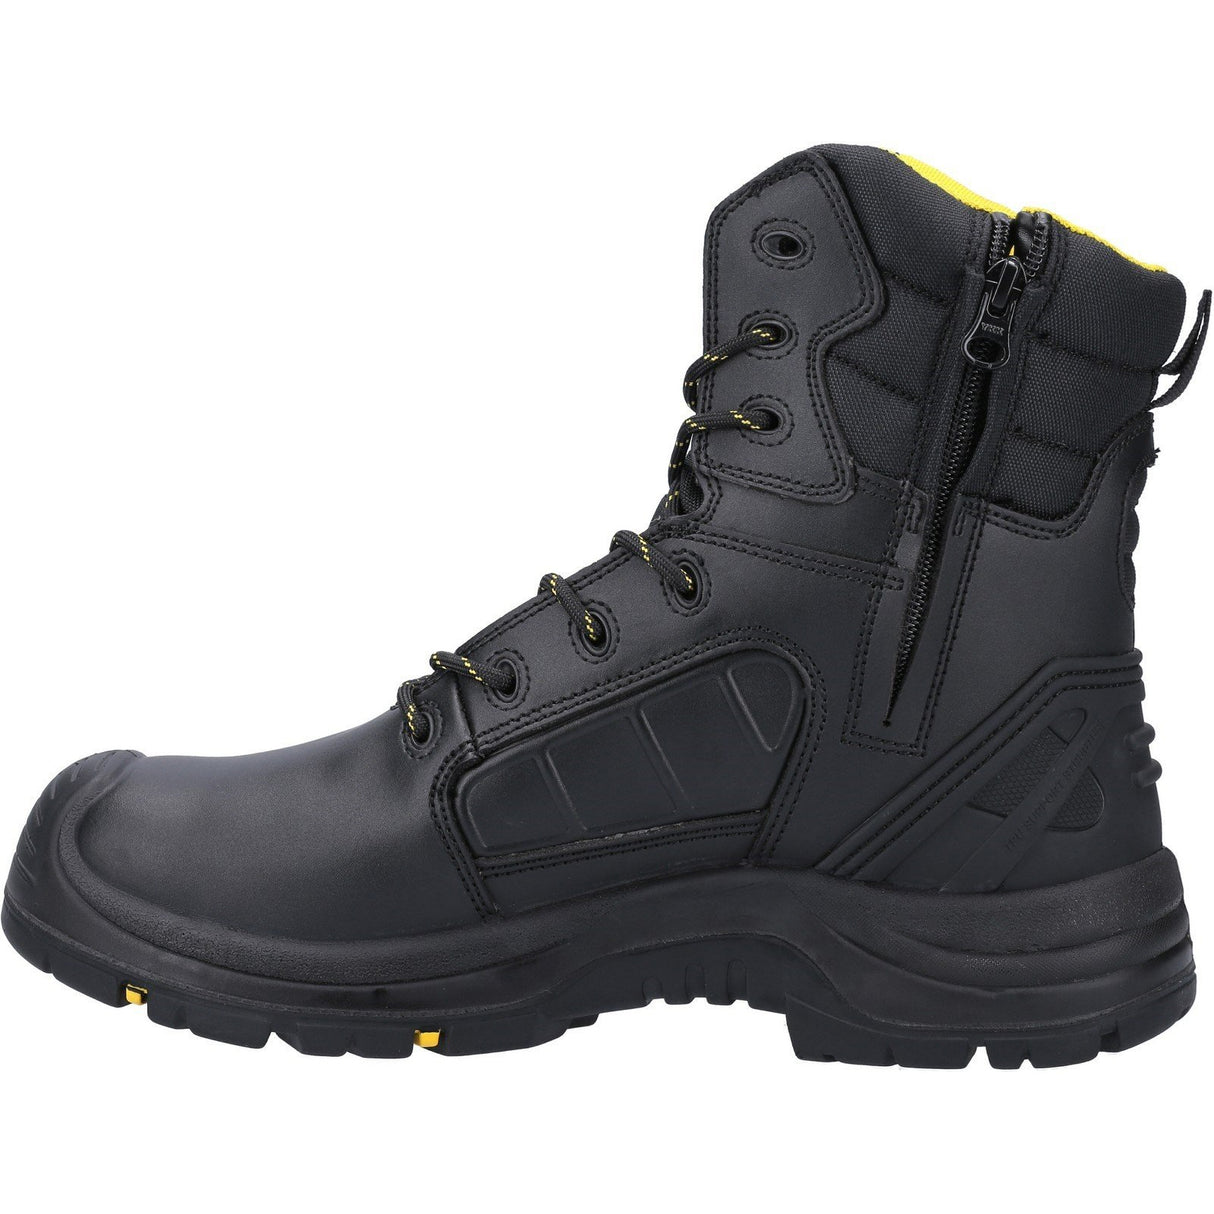 Amblers Safety AS350C Berwyn Safety Boots